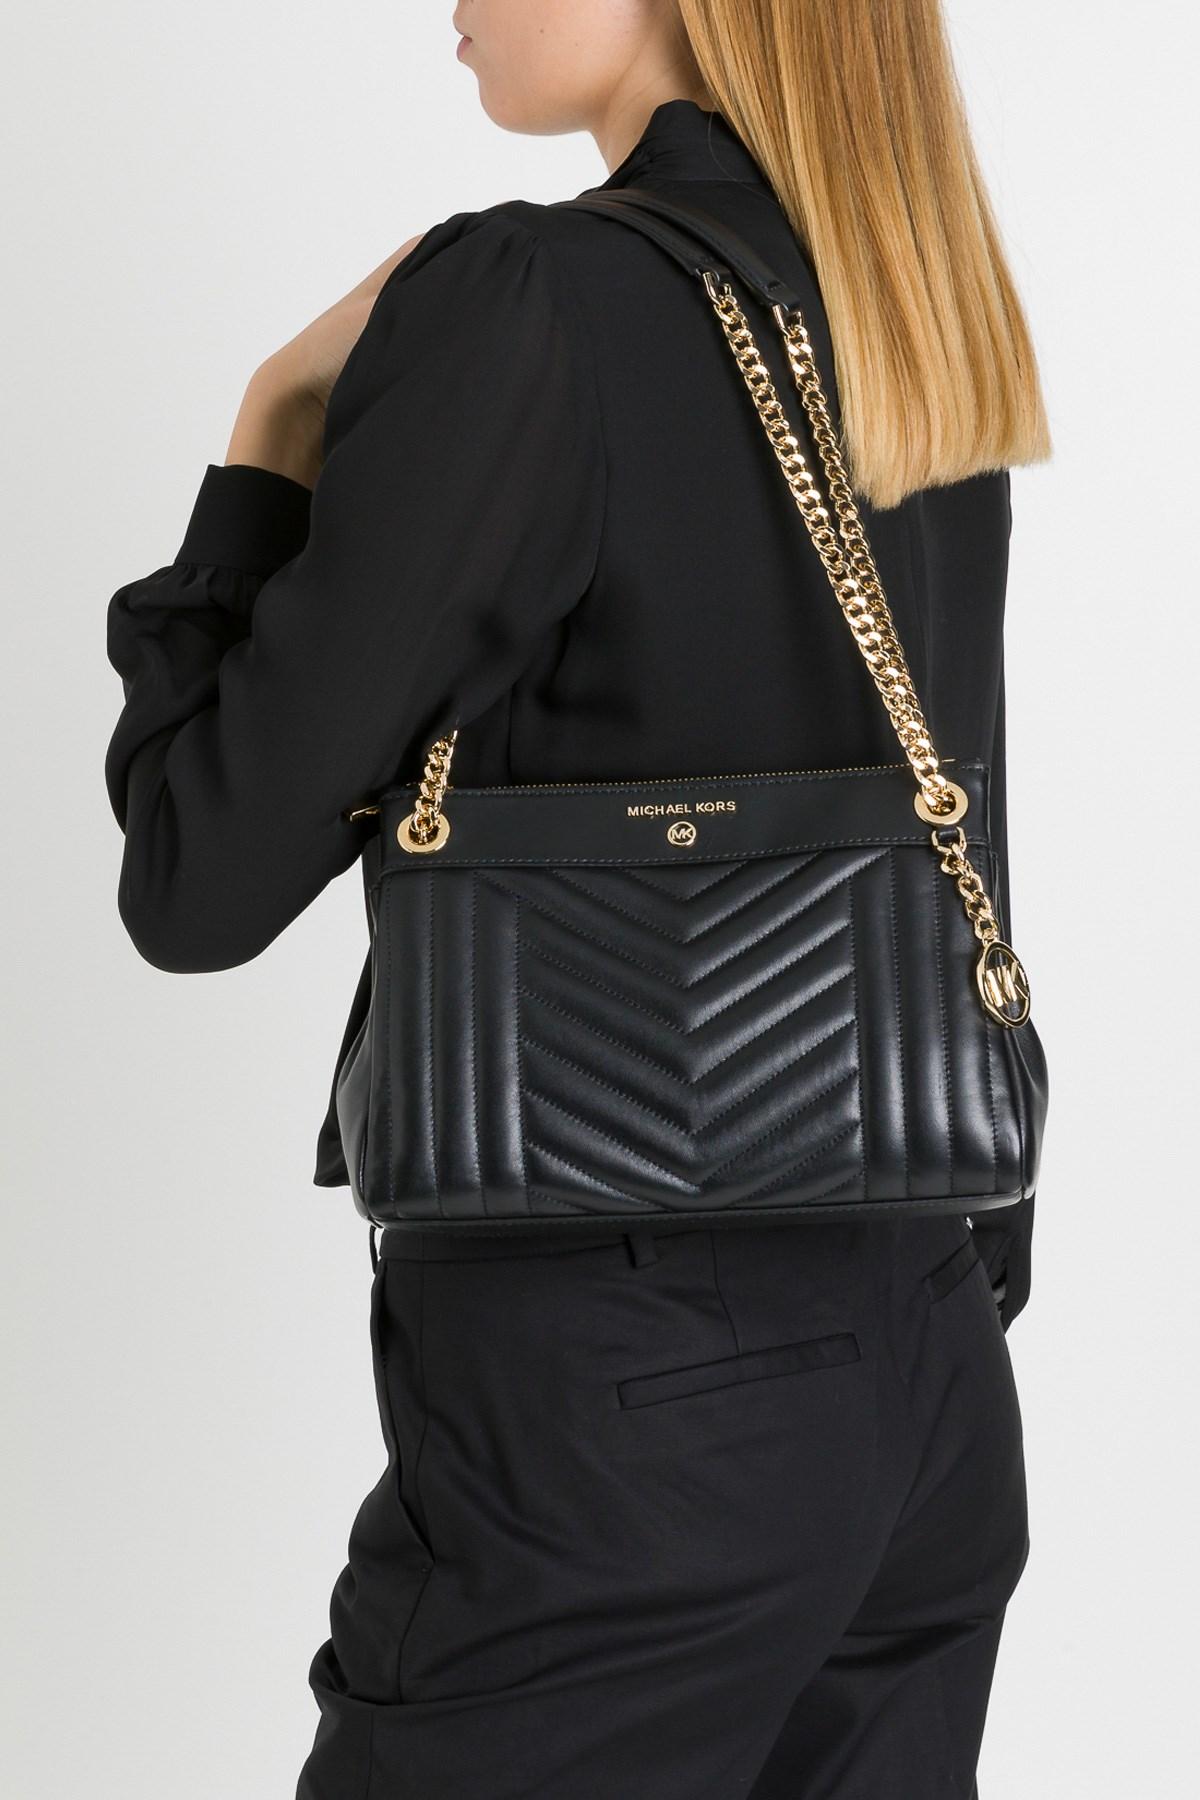 MICHAEL Michael Kors Susan Small Quilted Leather Shoulder Bag in Black -  Lyst